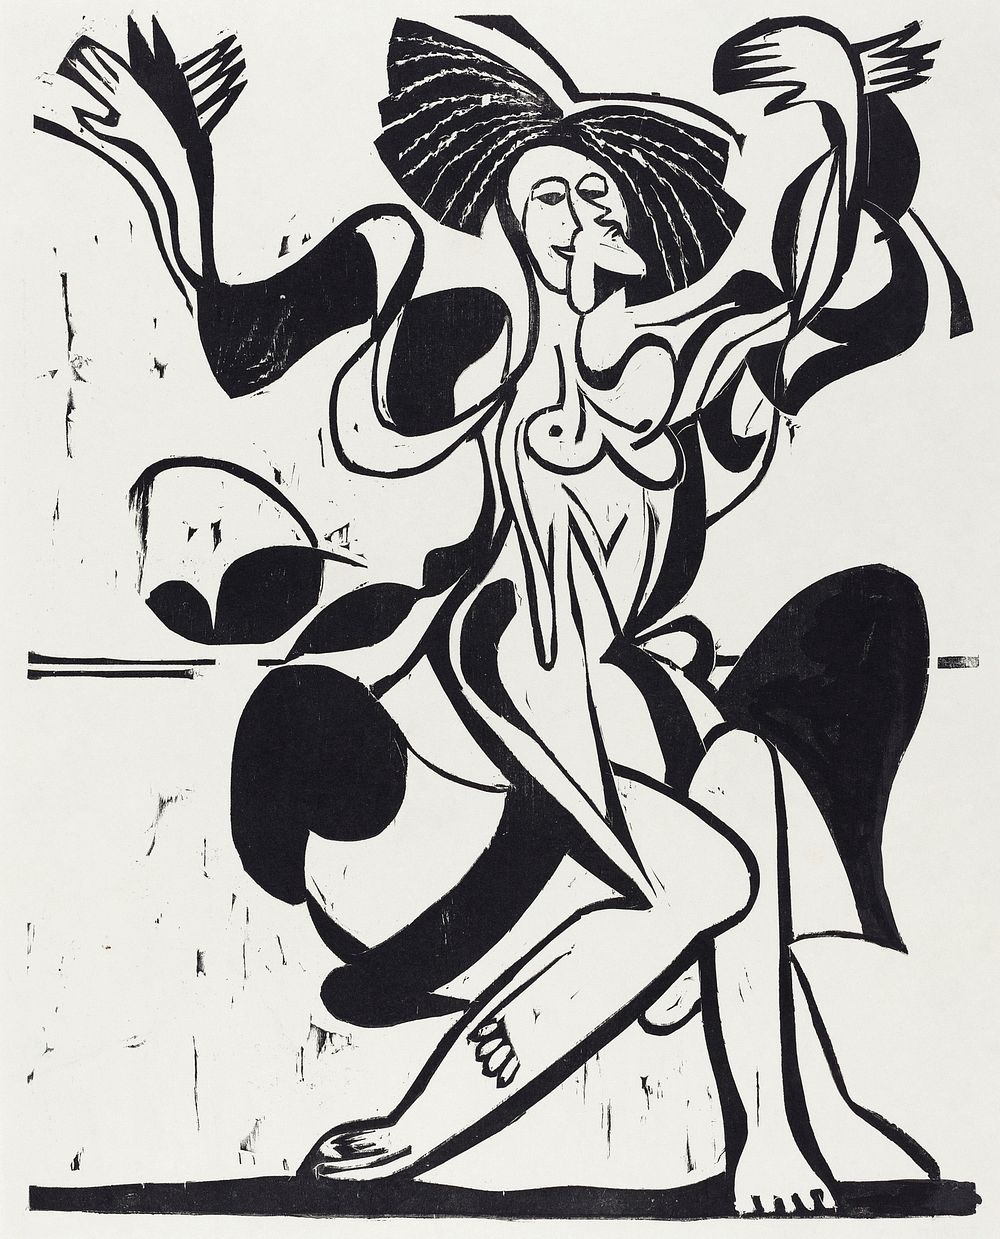 Mary Wigman's Dance (1933) print in high resolution by Ernst Ludwig Kirchner. Original from The National Gallery of Art.…